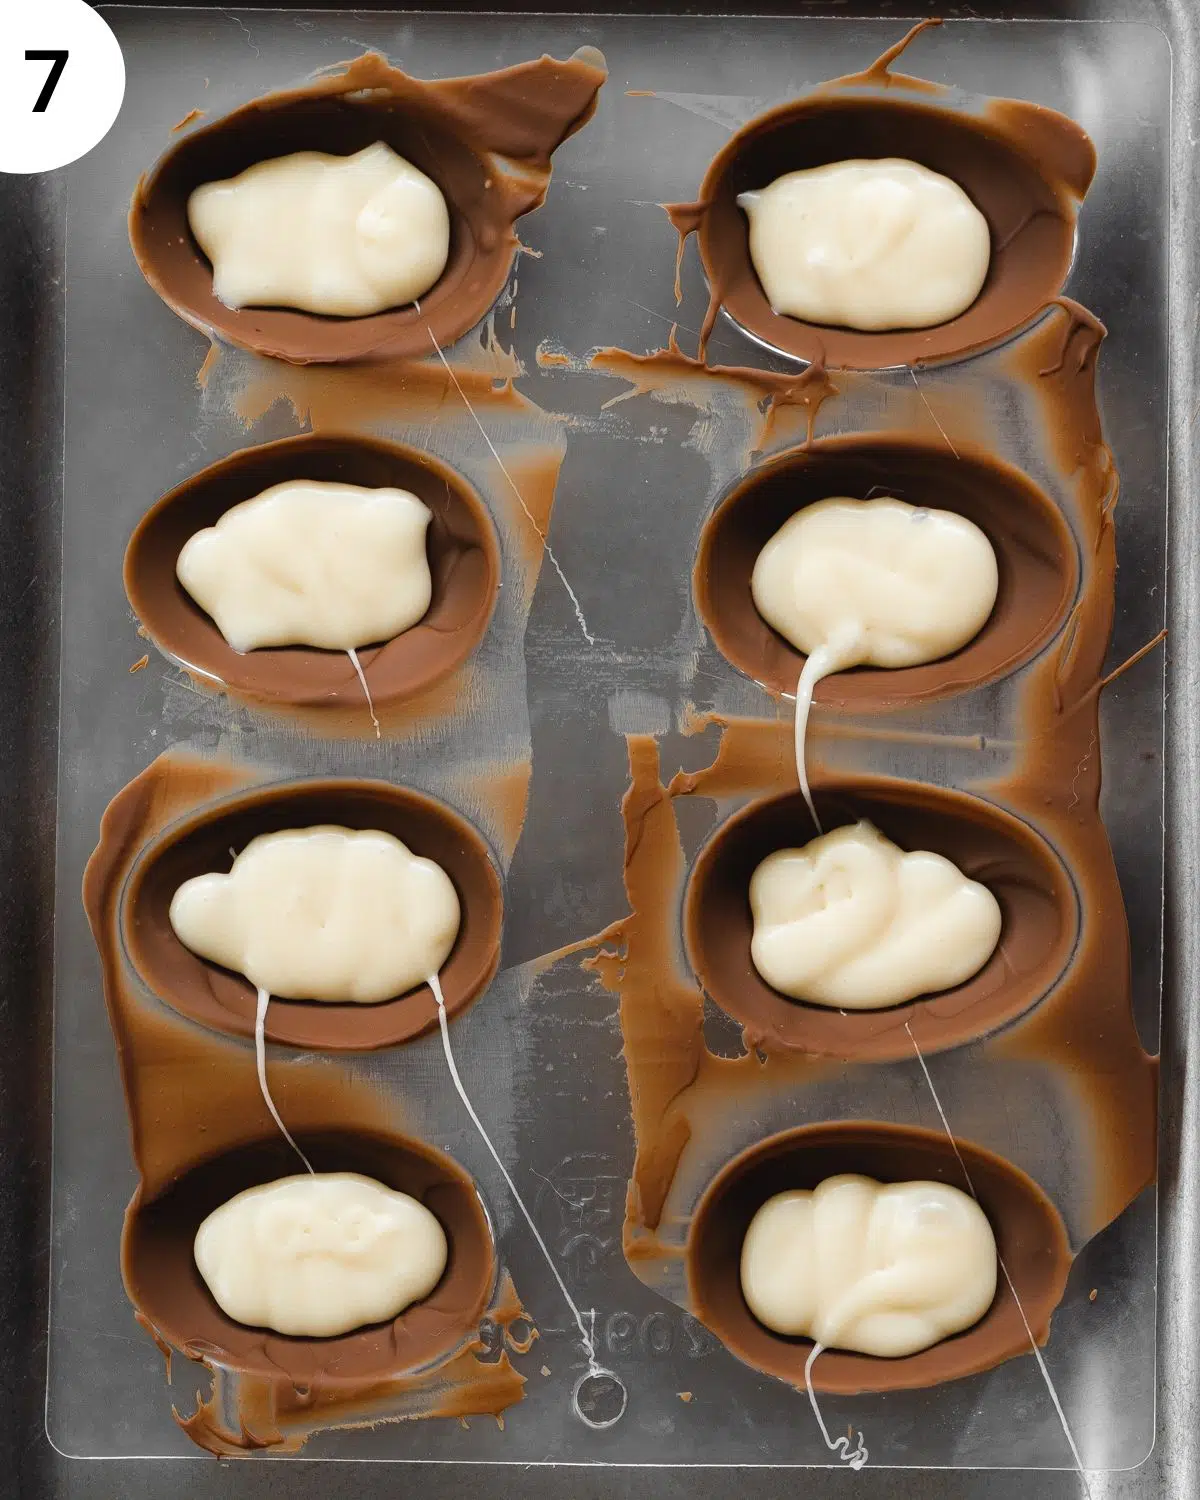 filled creme eggs in an easter egg mold.